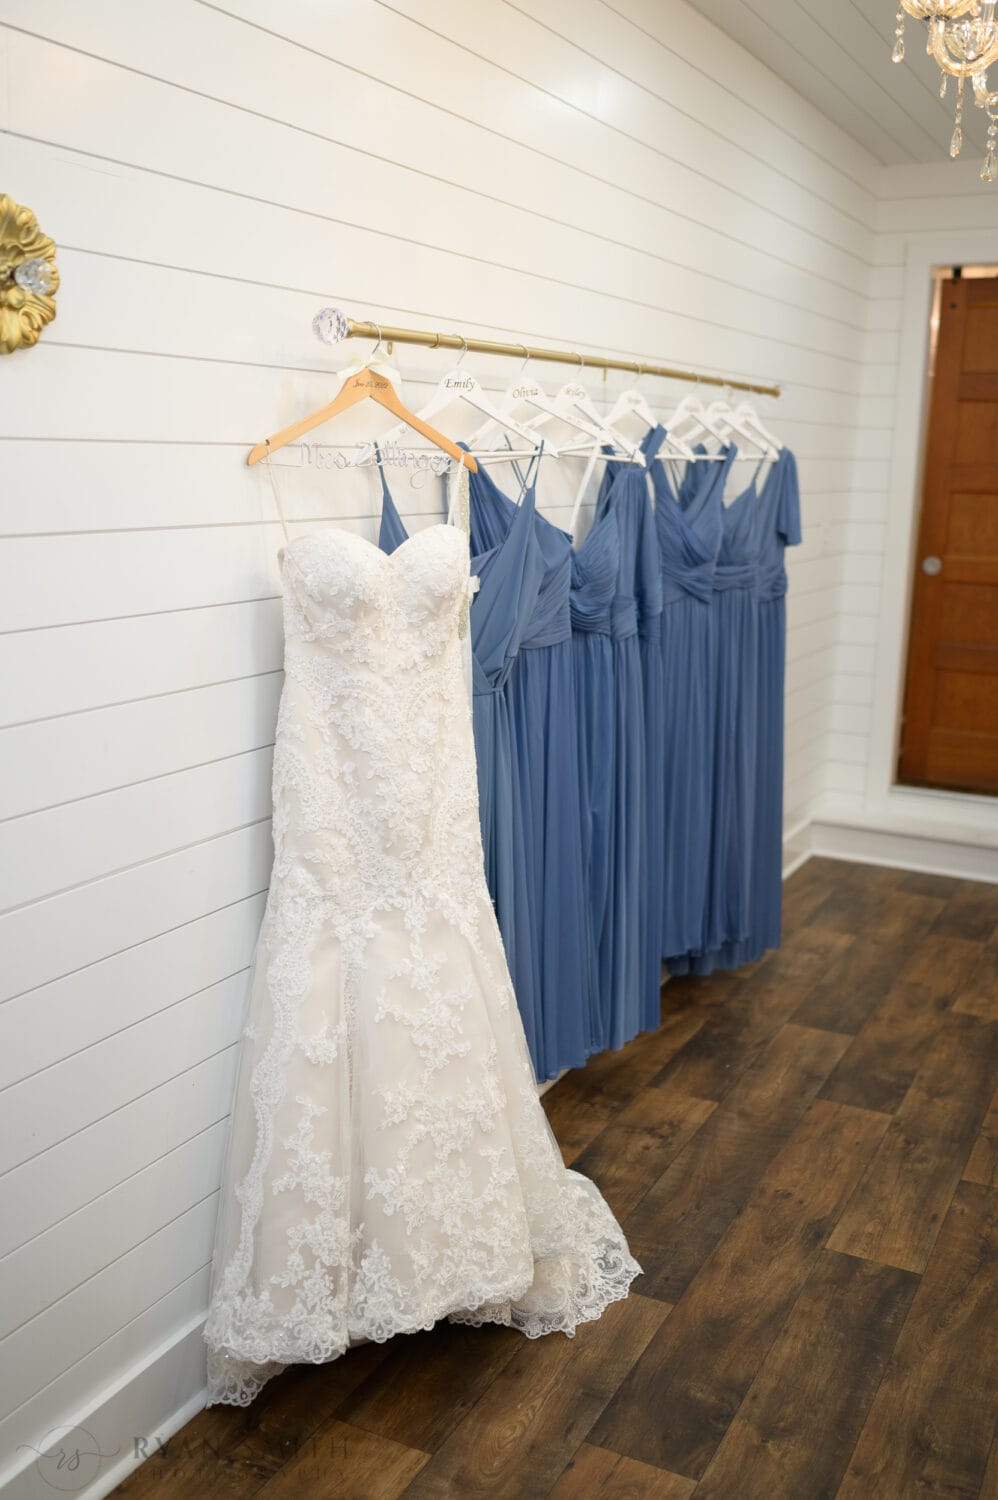 Dresses hanging in the bride's room - The Peanut Warehouse - Conway